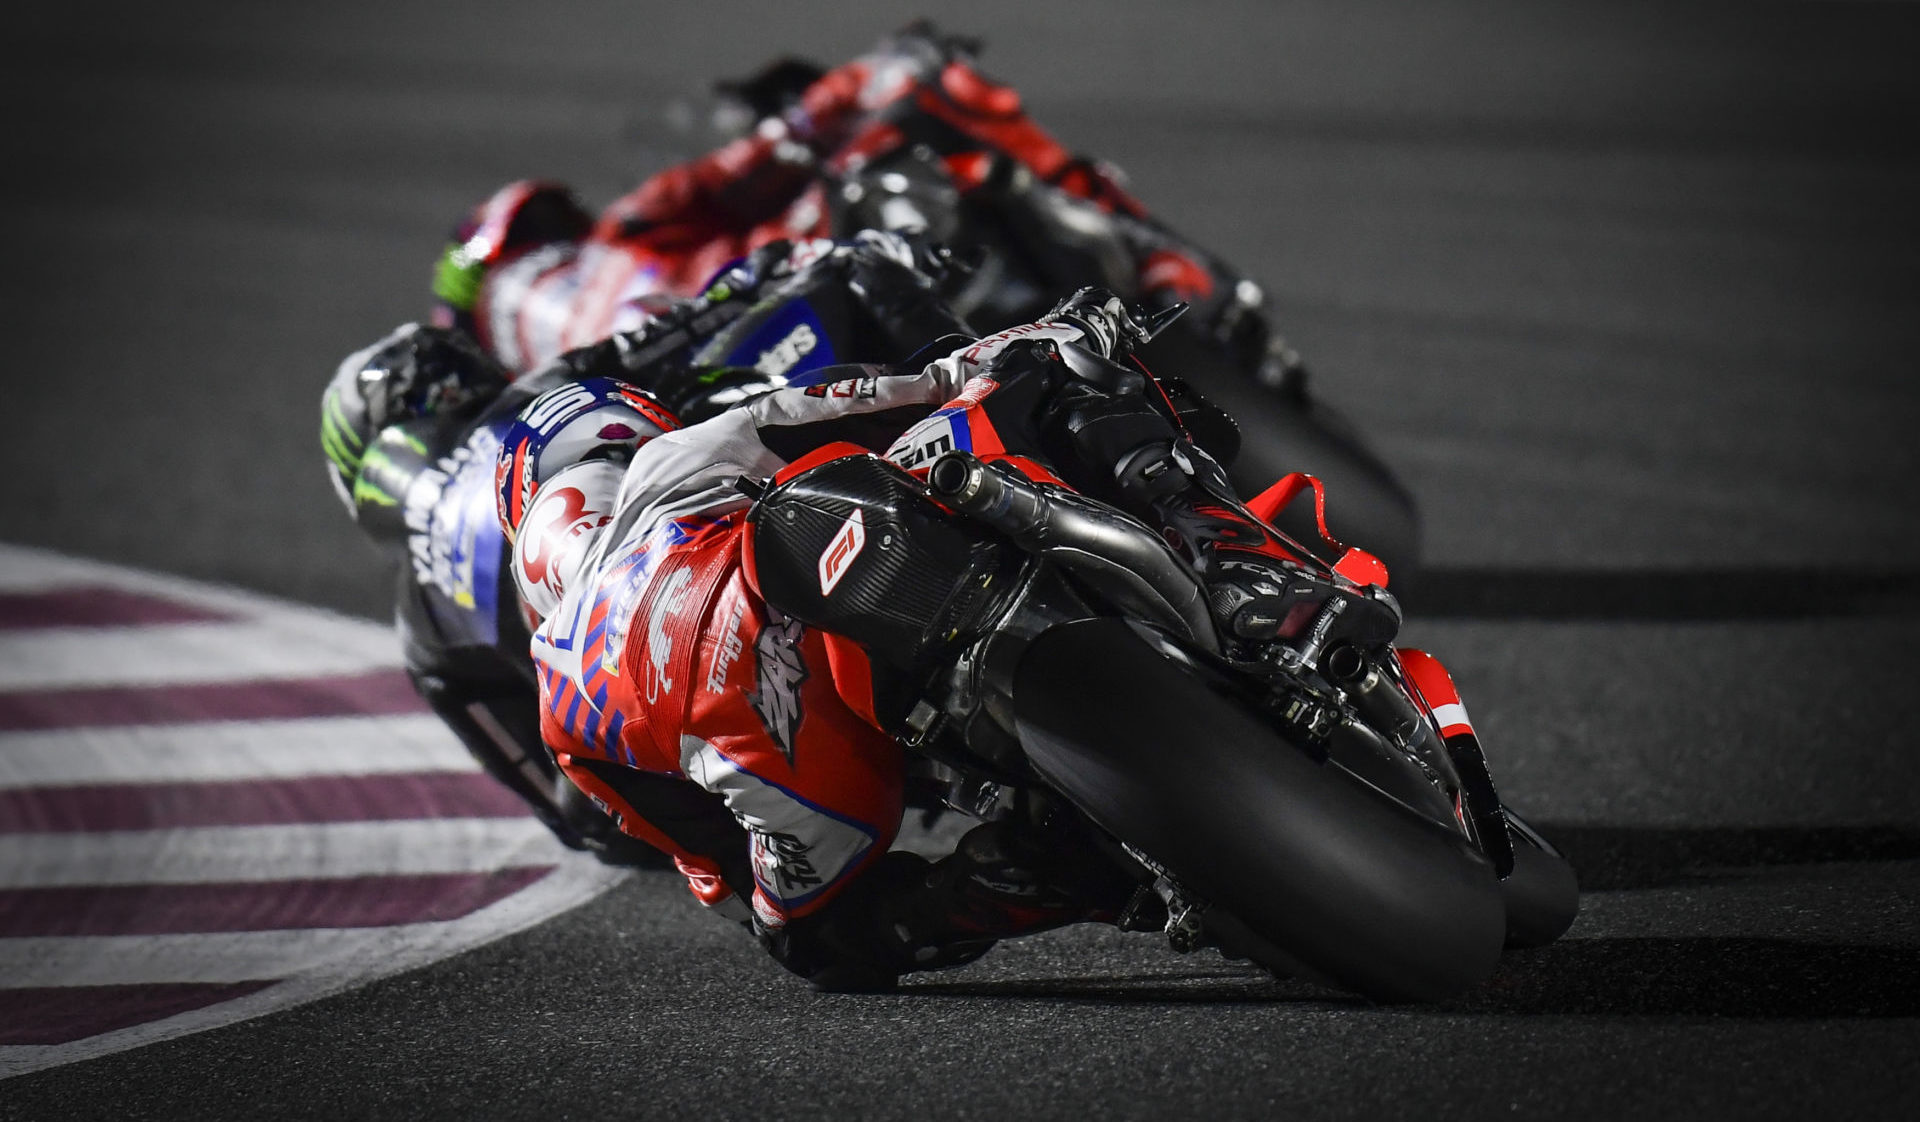 The MotoGP World Championship continues with Round Two, the TISSOT Grand Prix of Doha, this coming weekend. Photo courtesy Dorna.